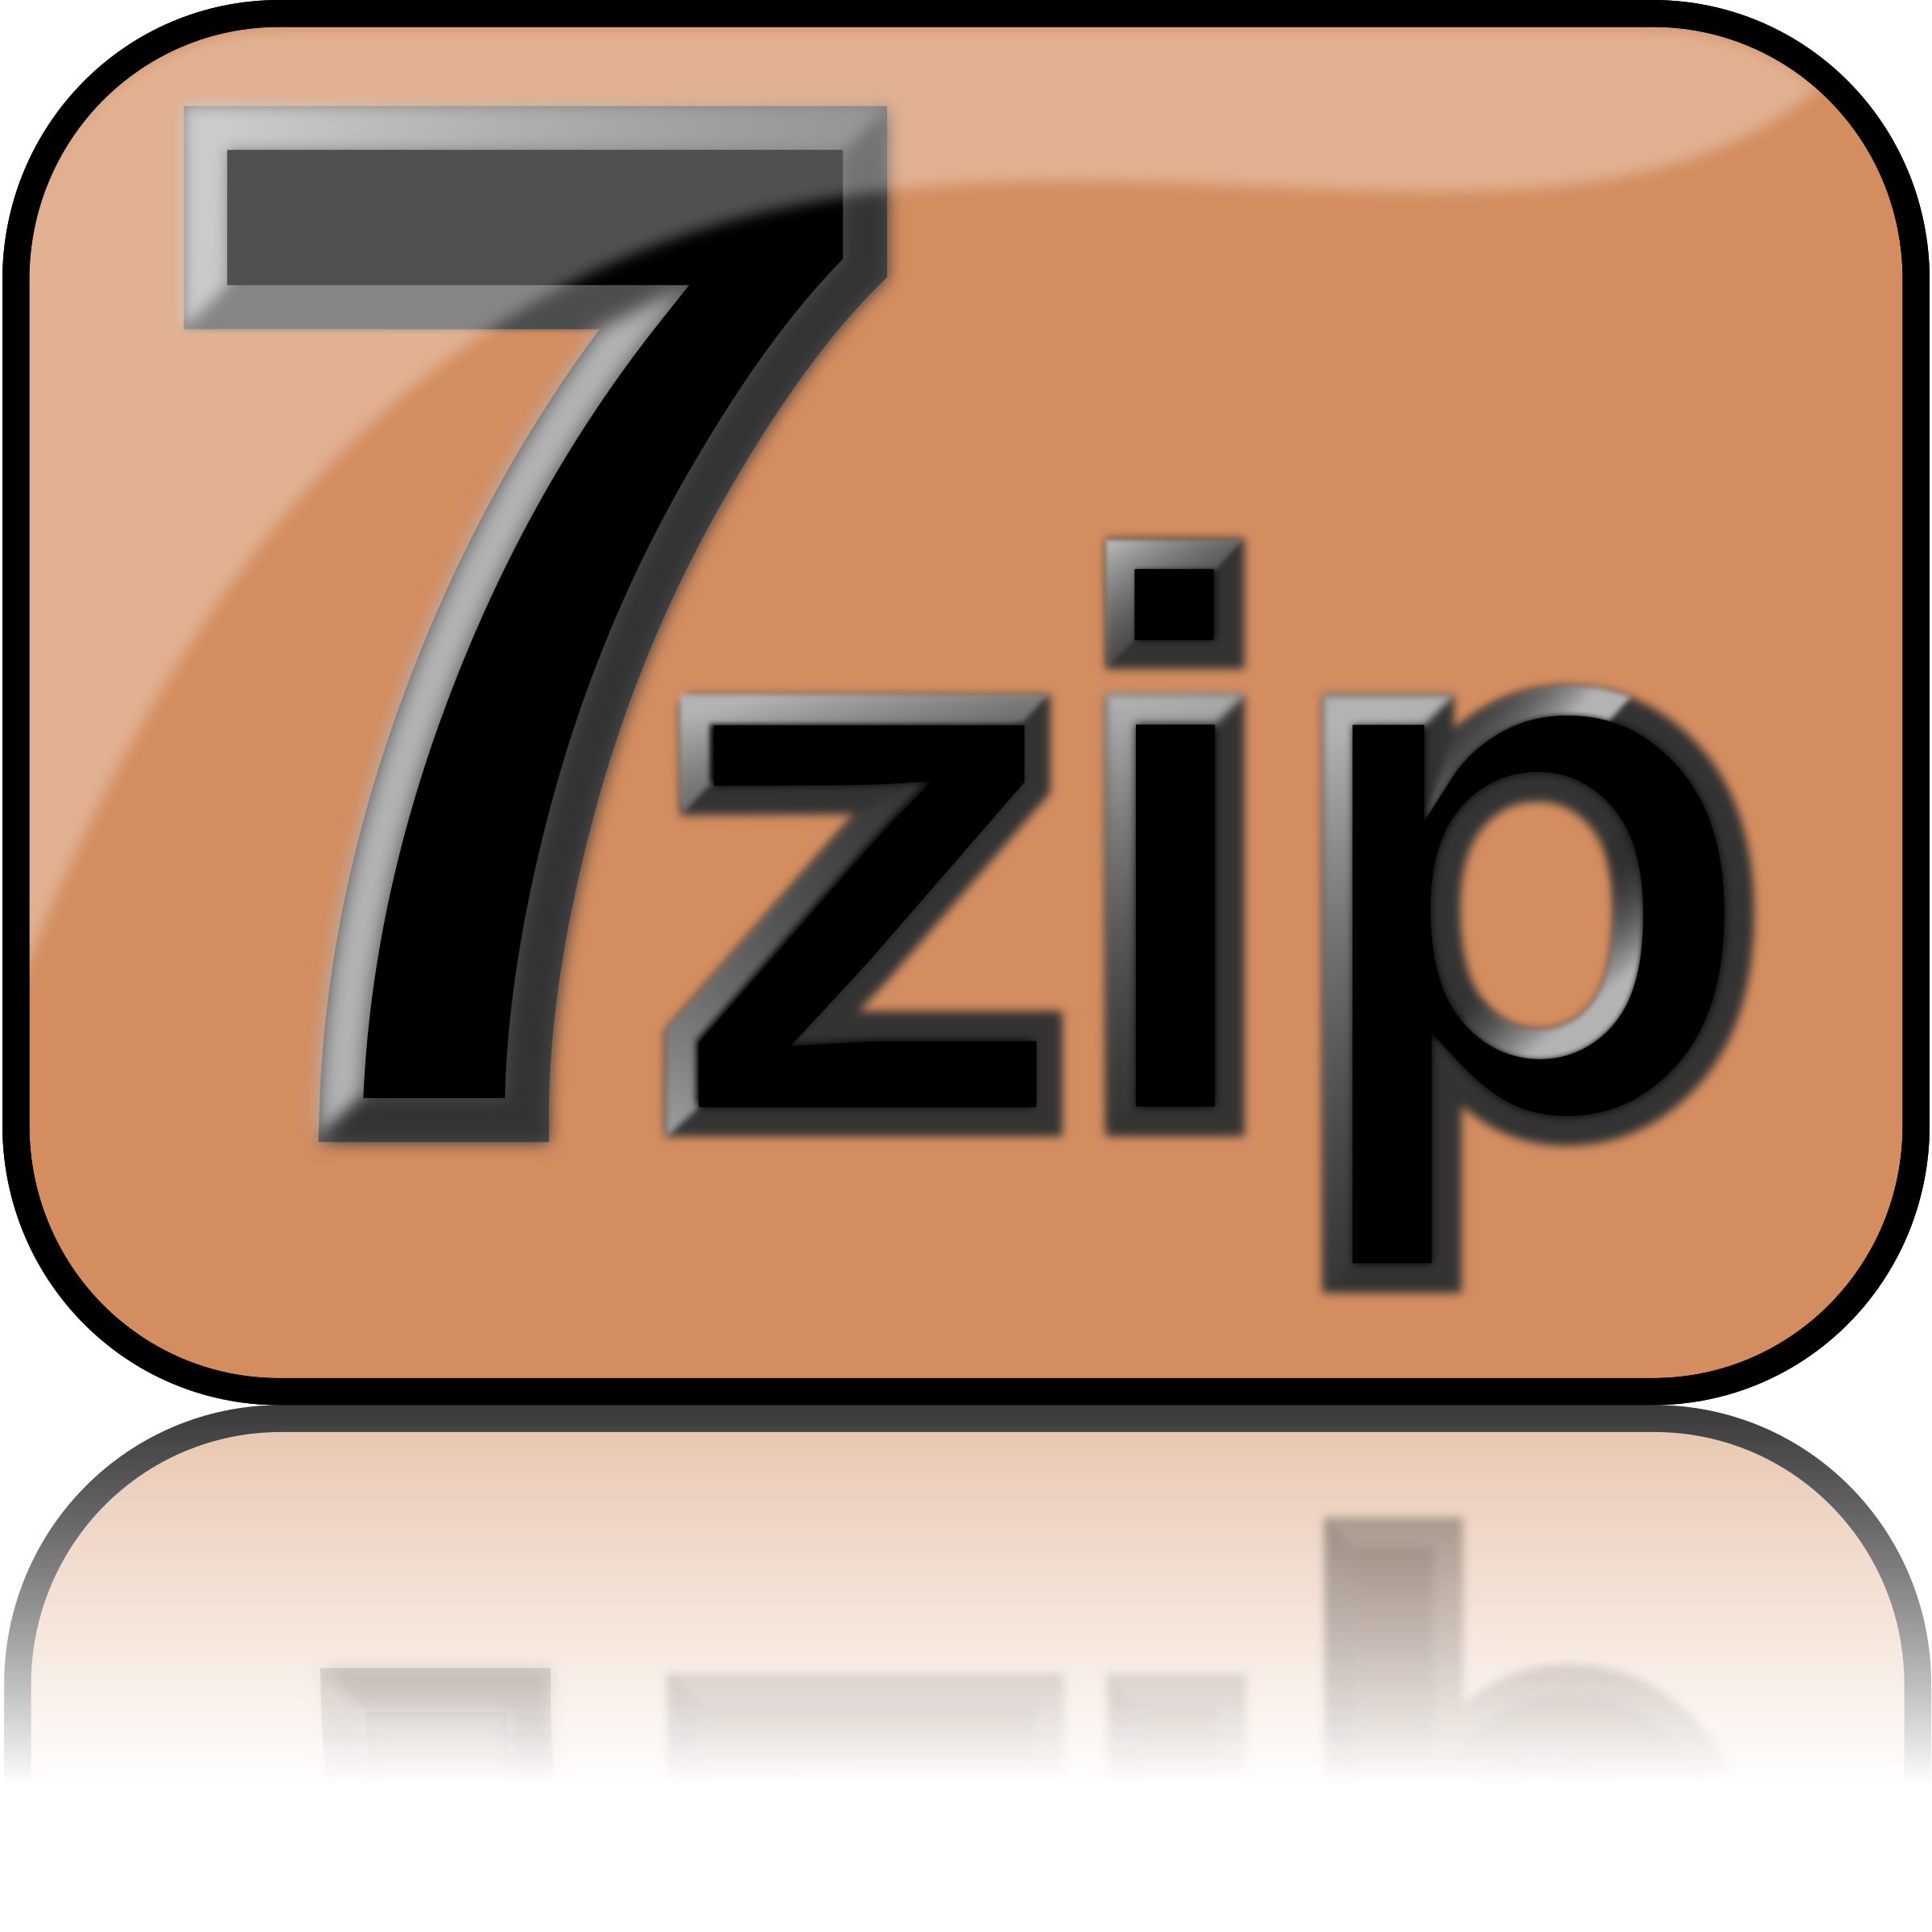 7zip Glossy Extrude Brown SVG Clip arts